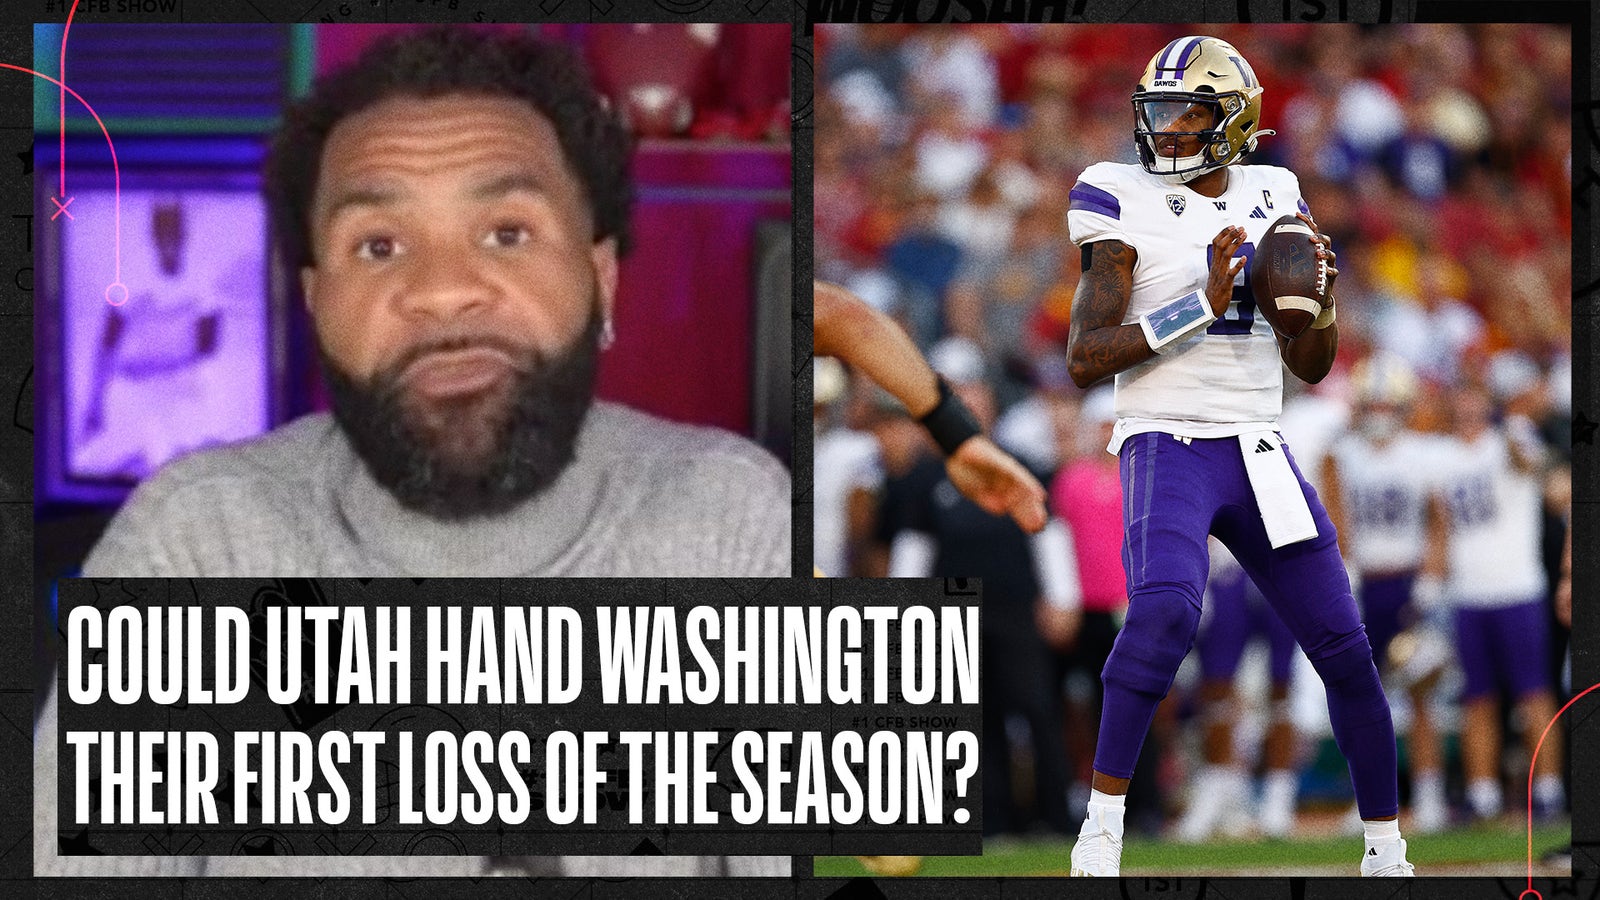 Is there an upset brewing for No. 5 Washington vs. No. 18 Utah?